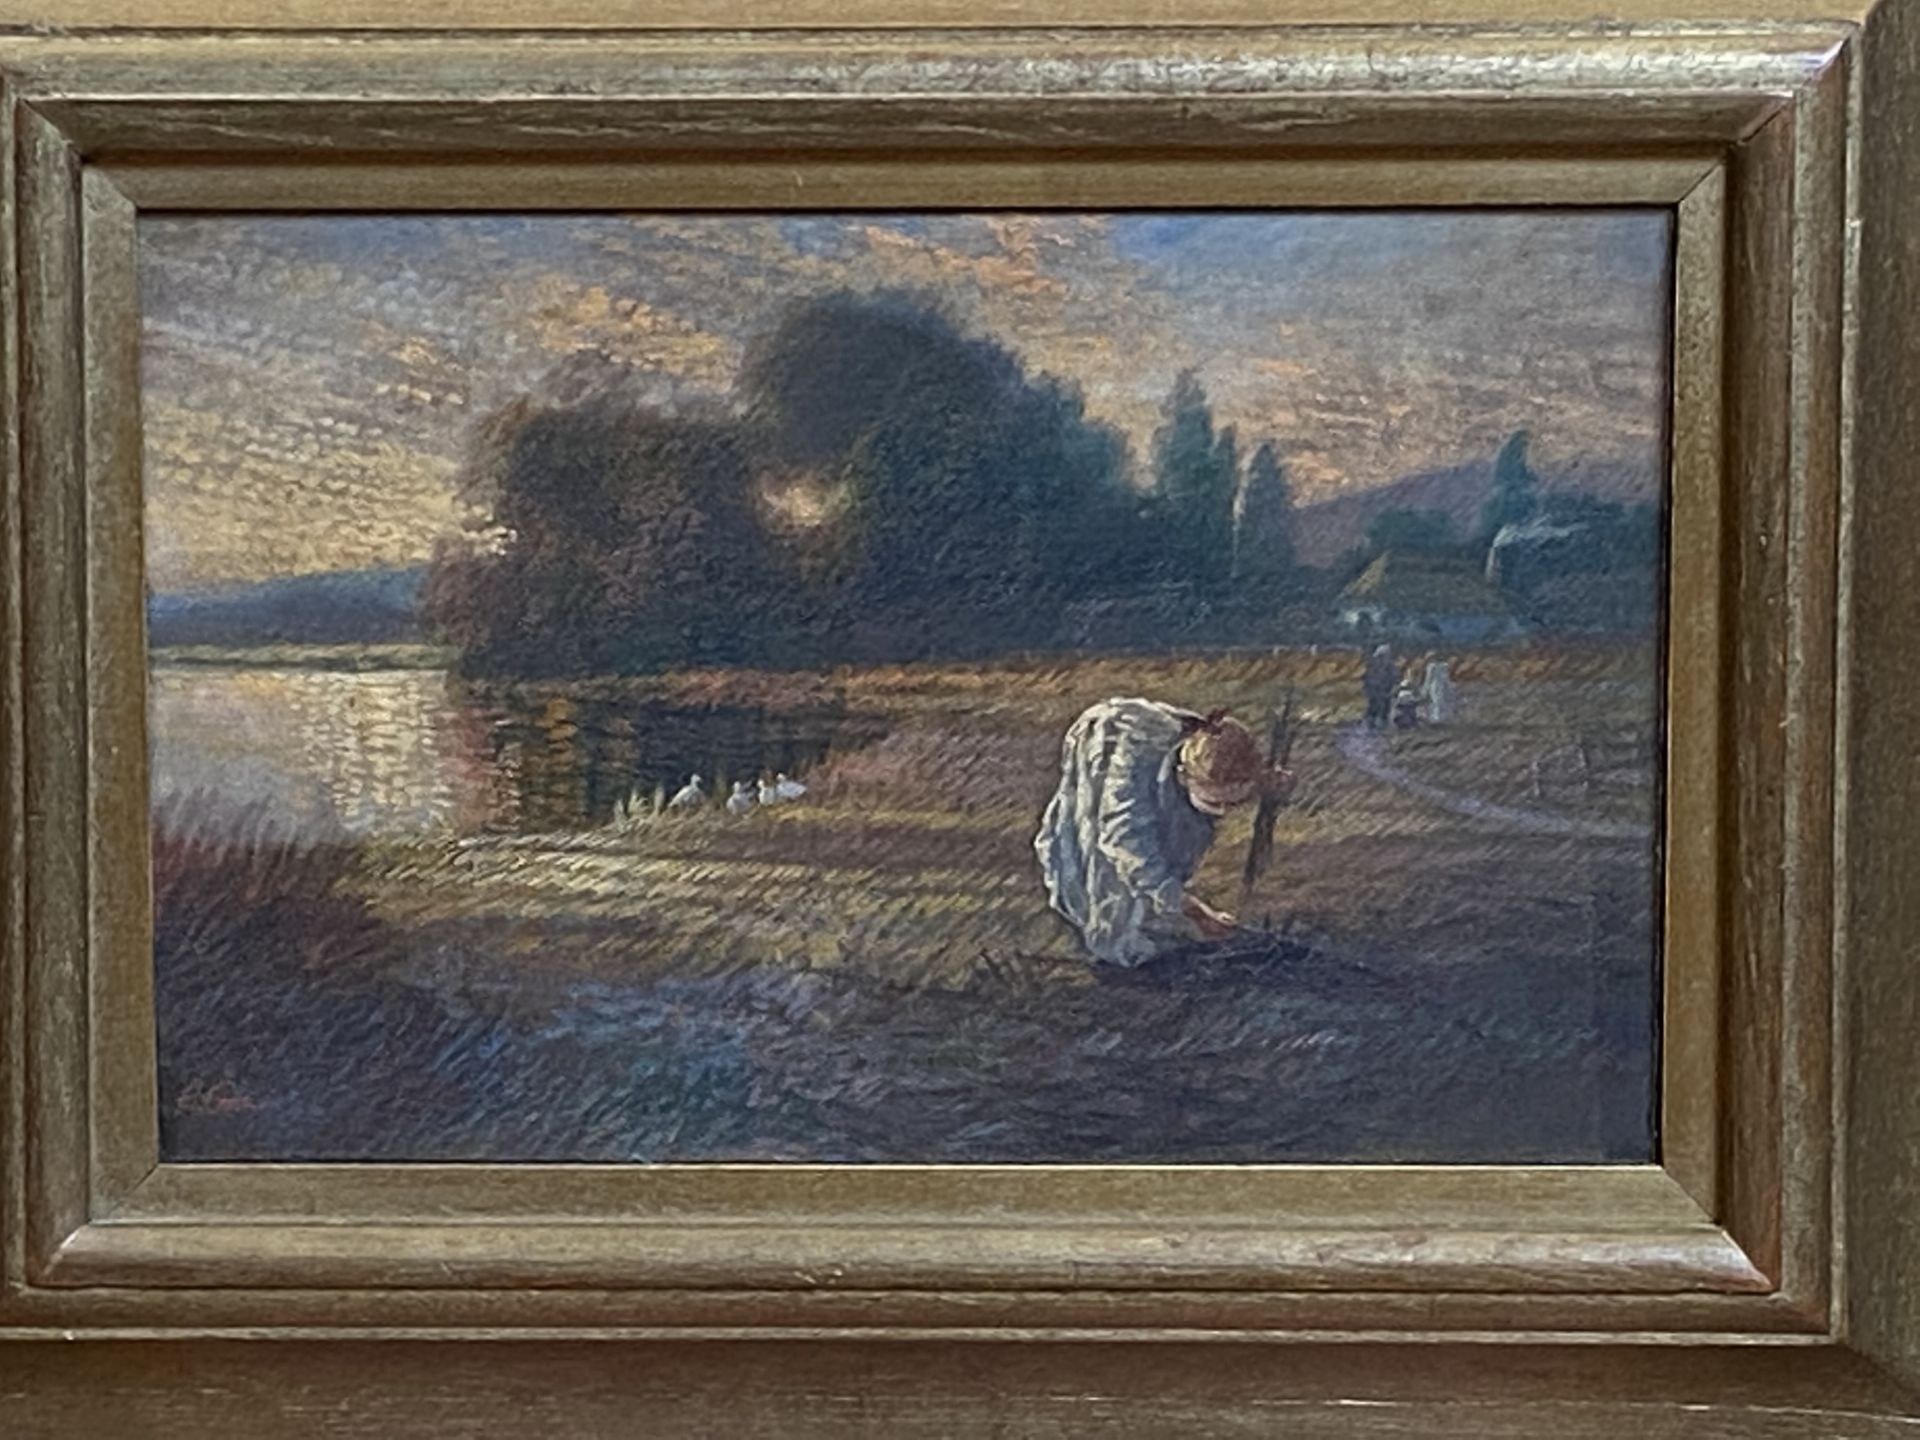 E. Grant - framed and glazed watercolour - Image 3 of 4